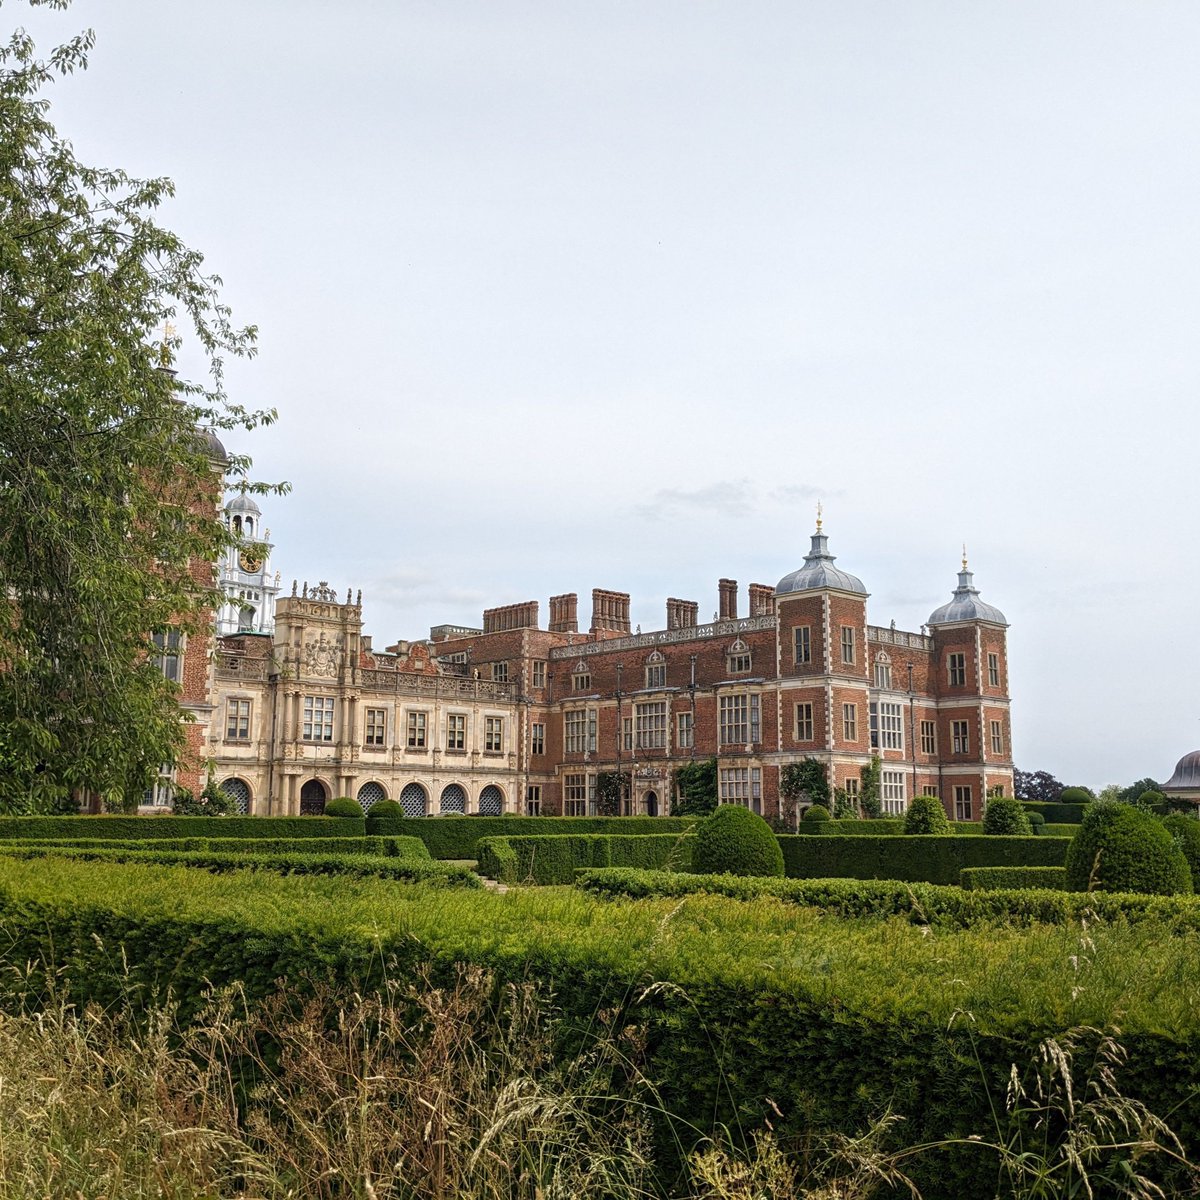 With summer around the corner in the UK, are you looking to start exploring Hertfordshire? Hatfield House is by Hatfield Station. You can explore the park and gardens, or opt to go into the house itself! Queen Elizabeth I spent much of her childhood there.